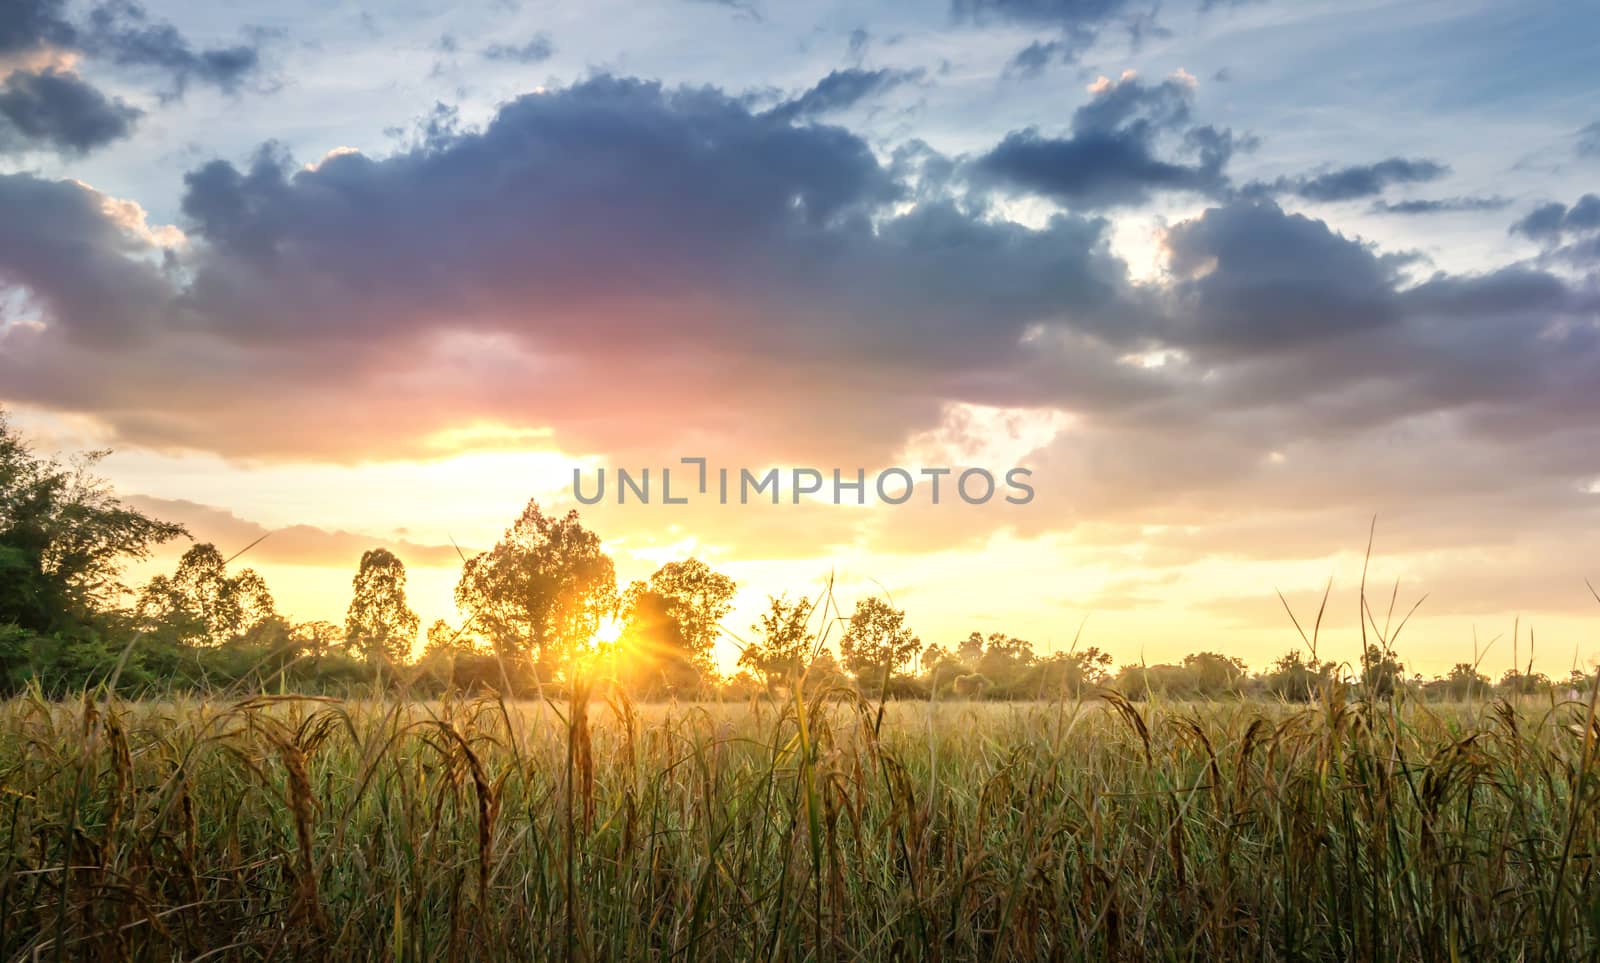 paddy rice fields in the countryside of Thailand at sunset time